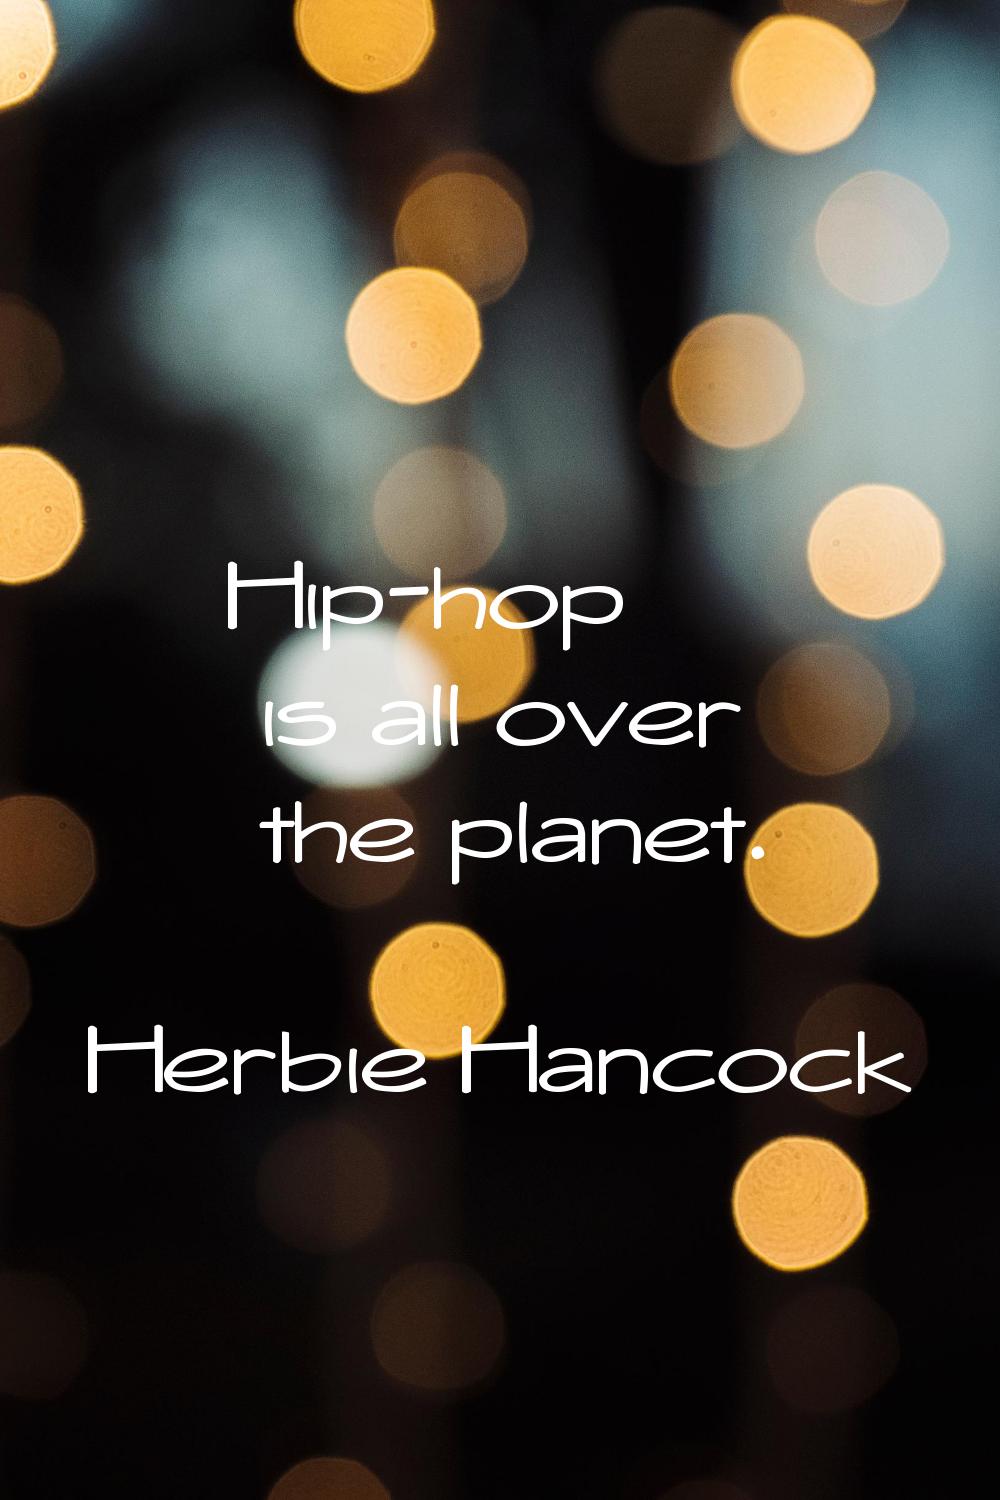 Hip-hop is all over the planet.